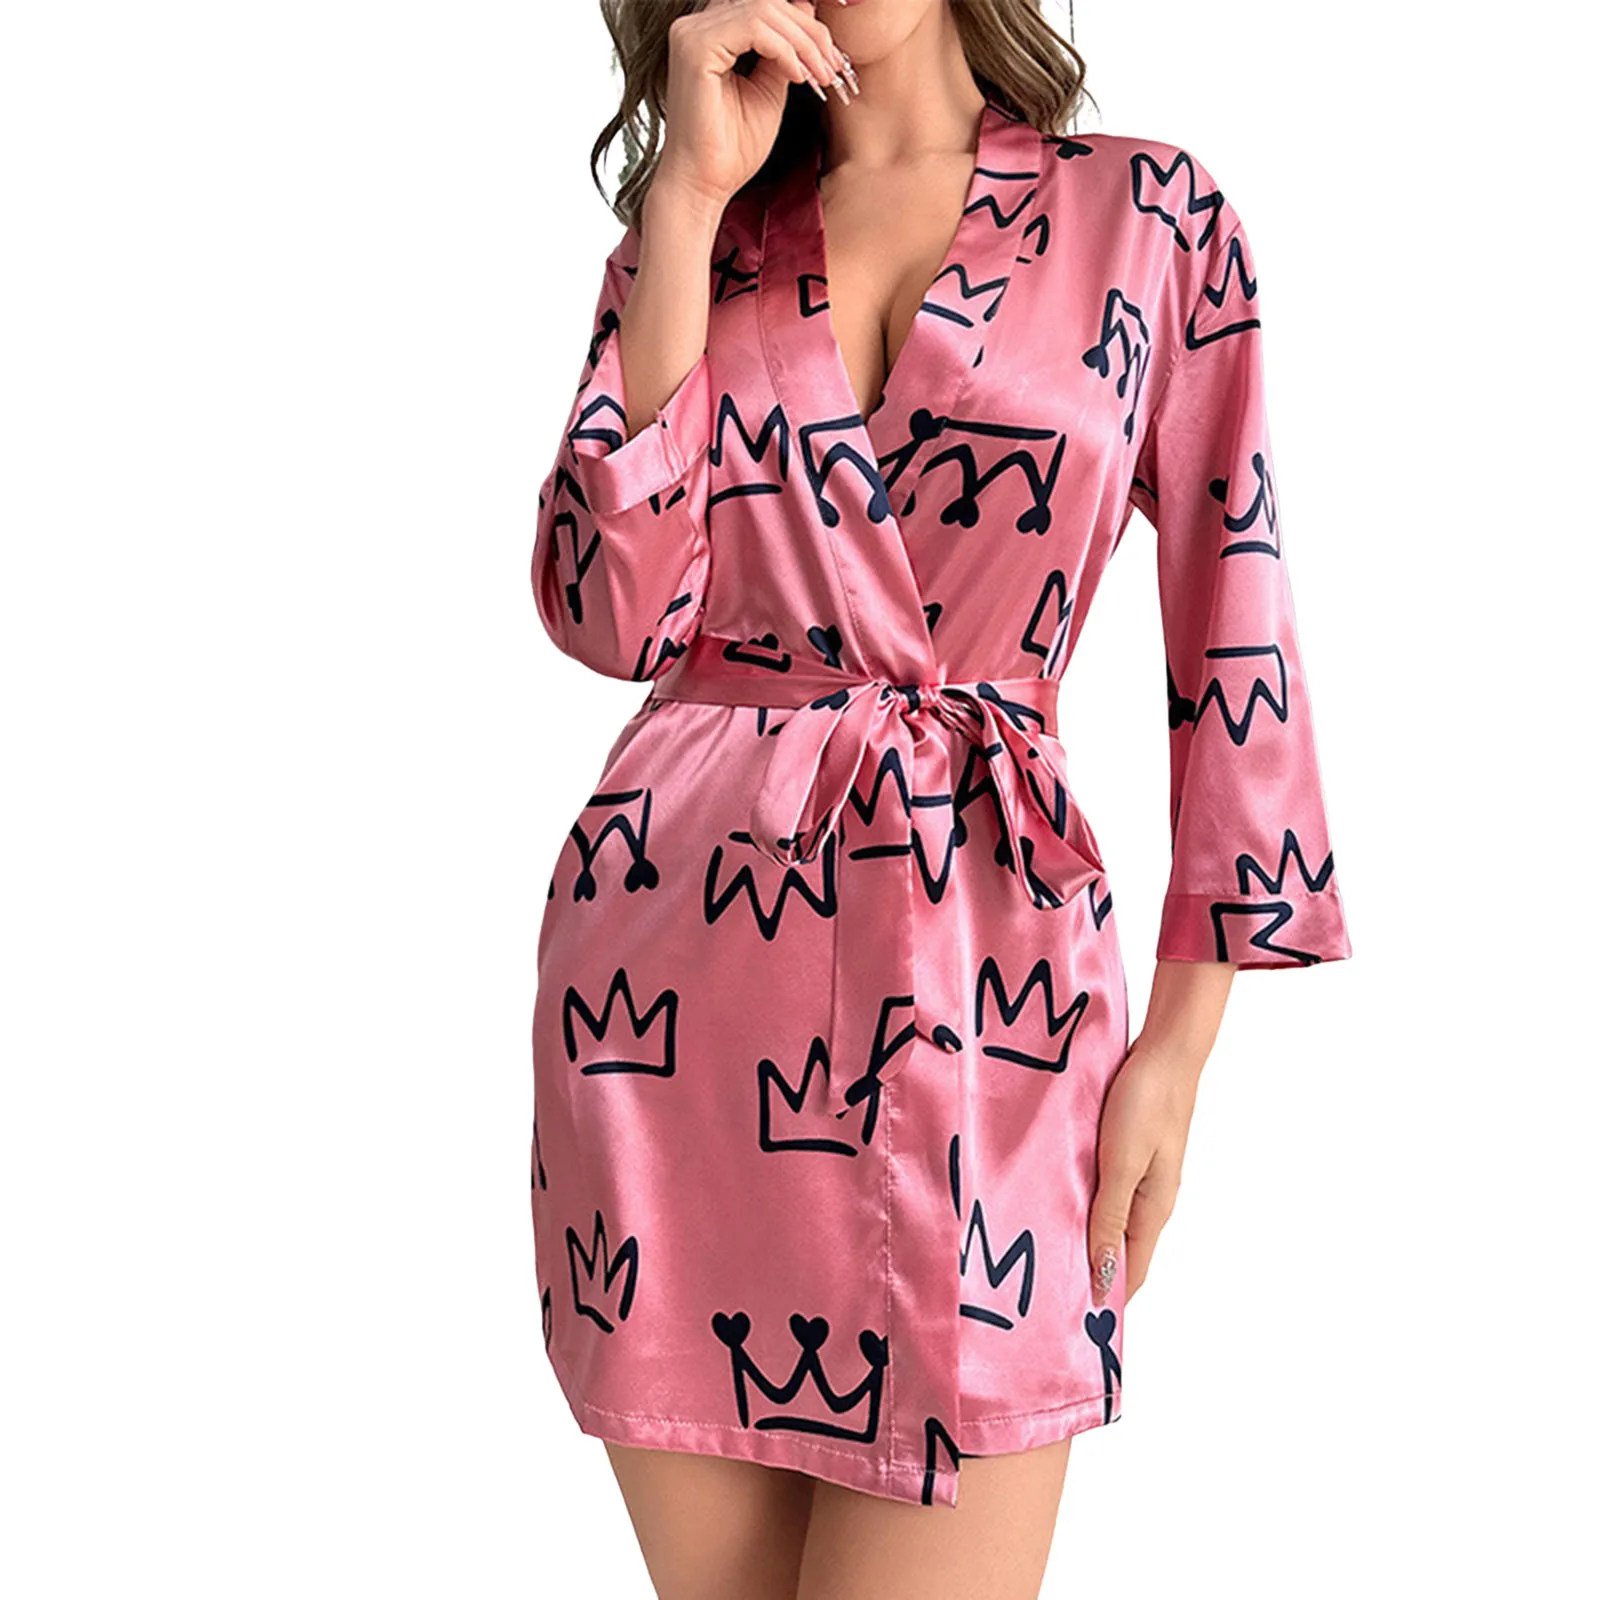 

Women Fashionable Caring Printed Pajamas With Lace Up Bathrobes Can Be Worn Externally With Ice Silk Pajamas